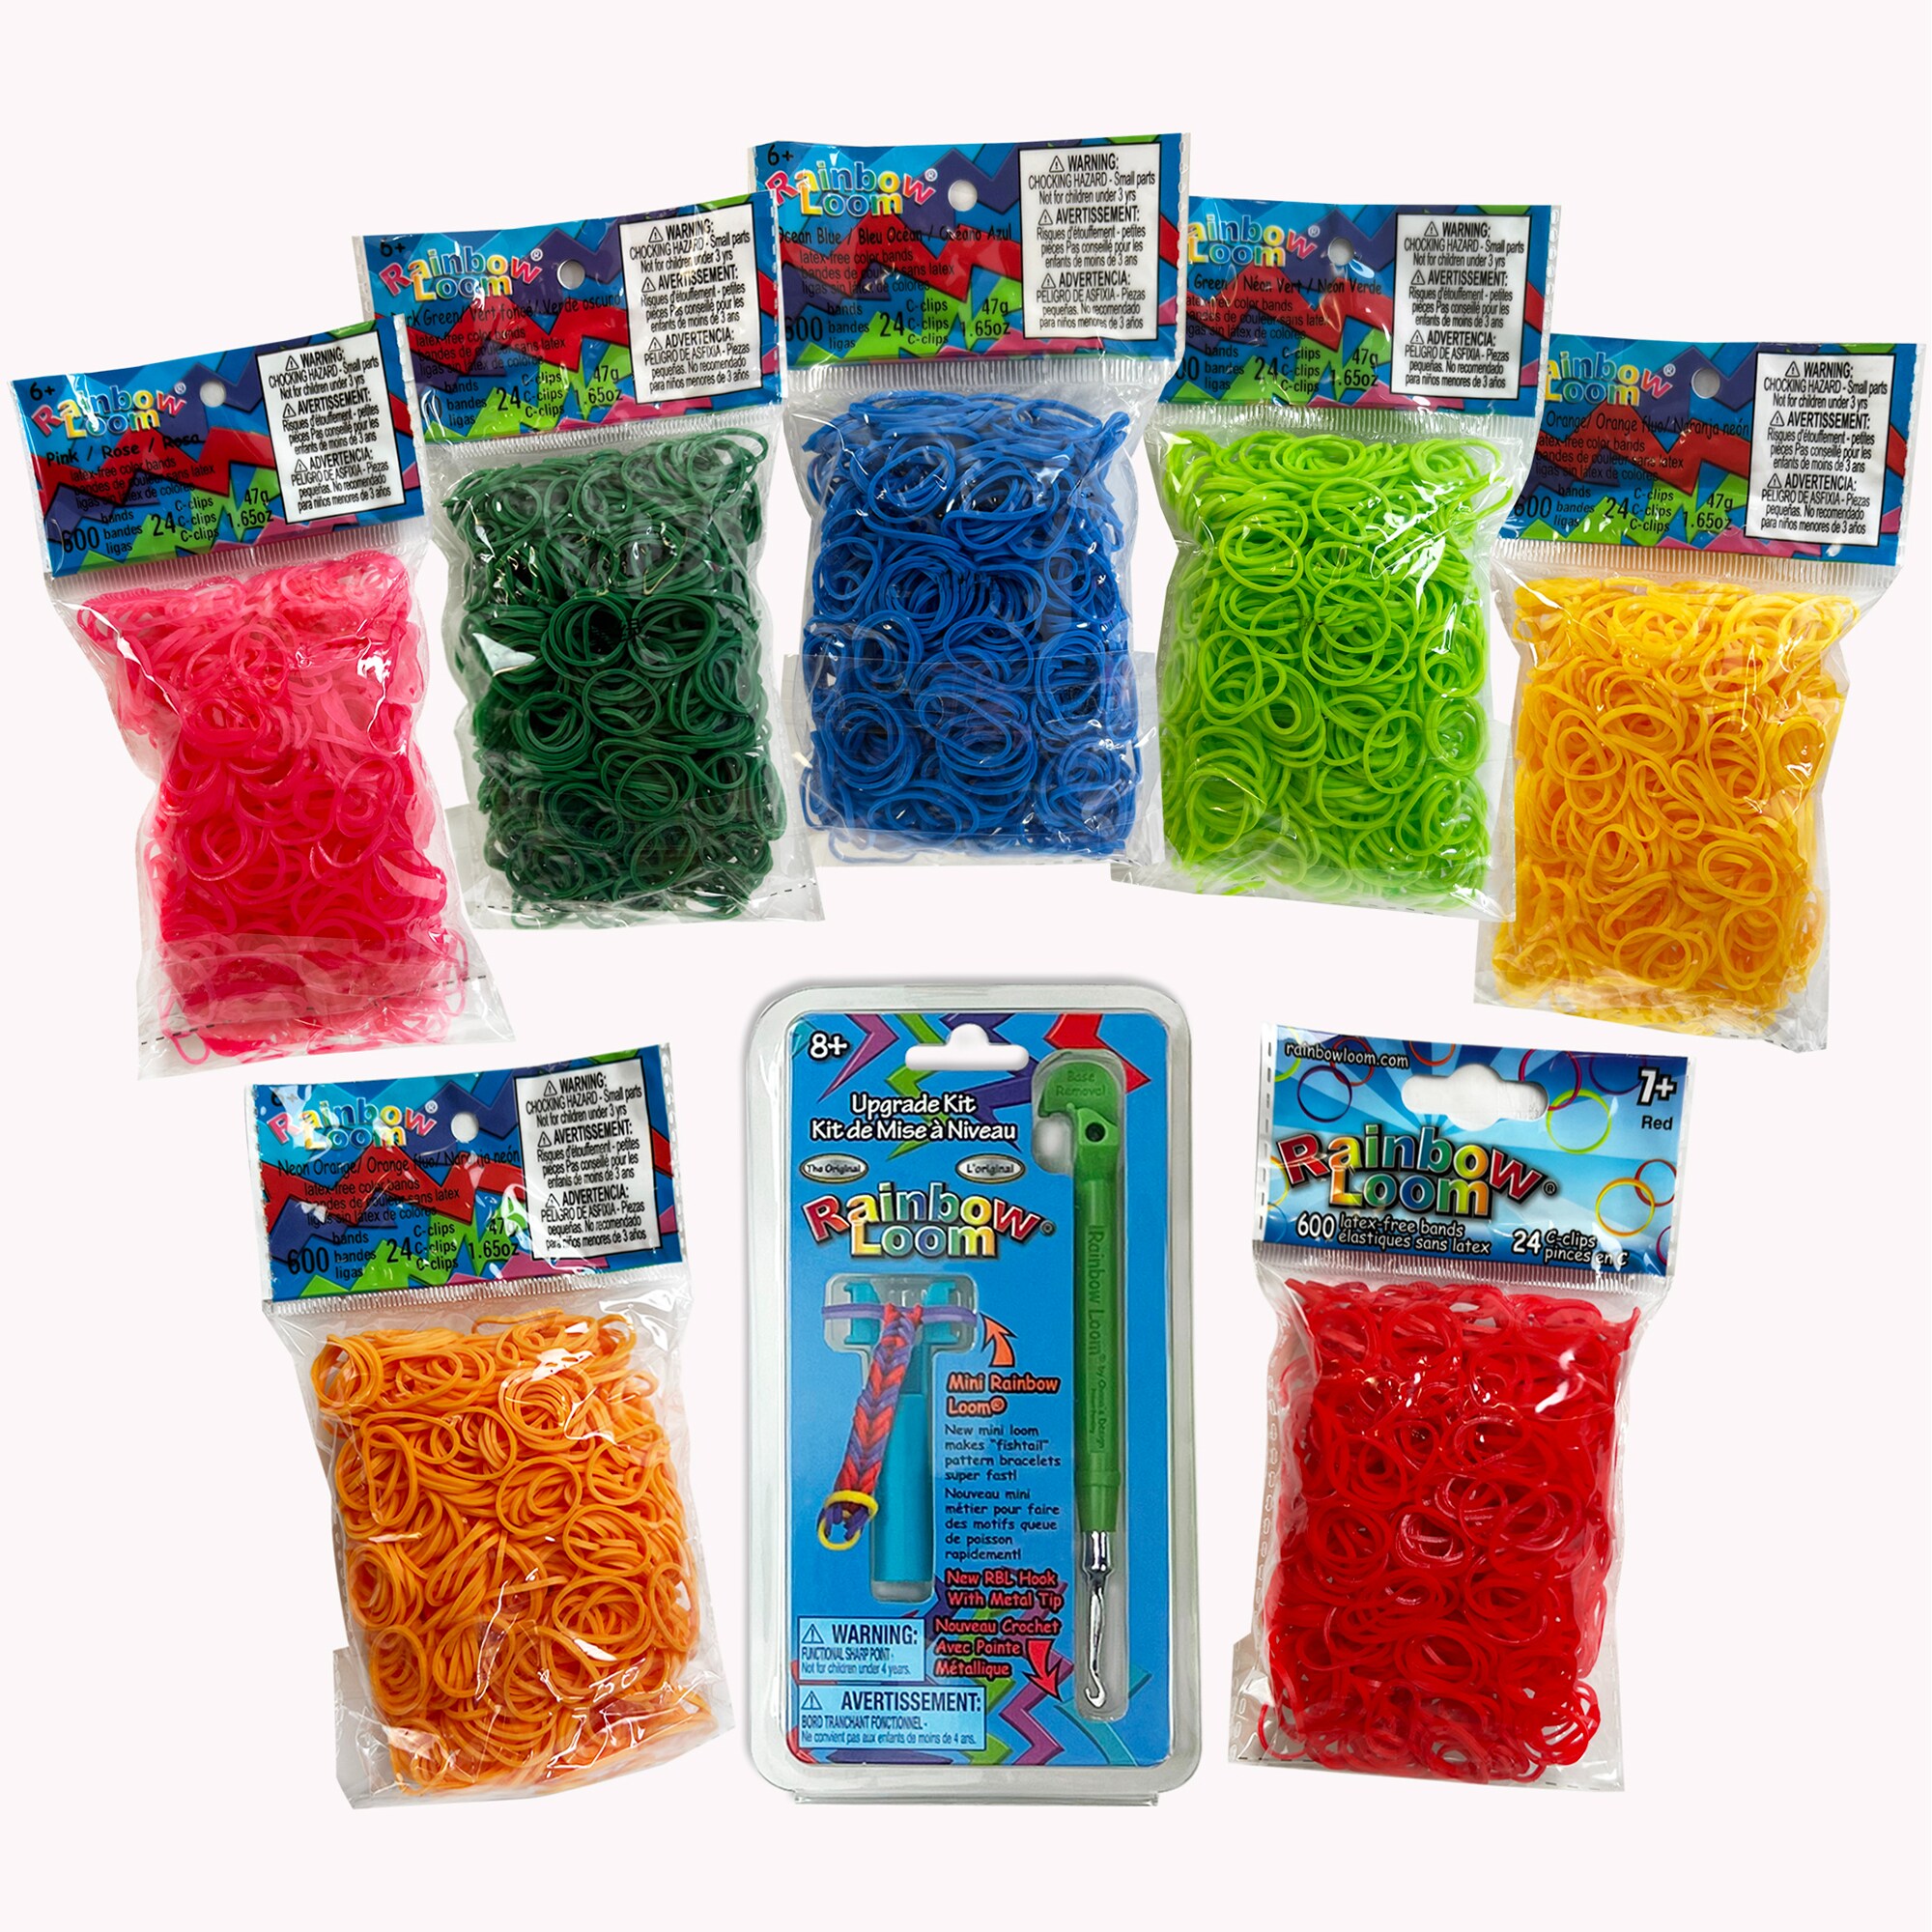 Rainbow Loom Bracelet-Making Kit with 600 Premium Rubber Bands, Boys and  Girls, Child, Ages 7+ 